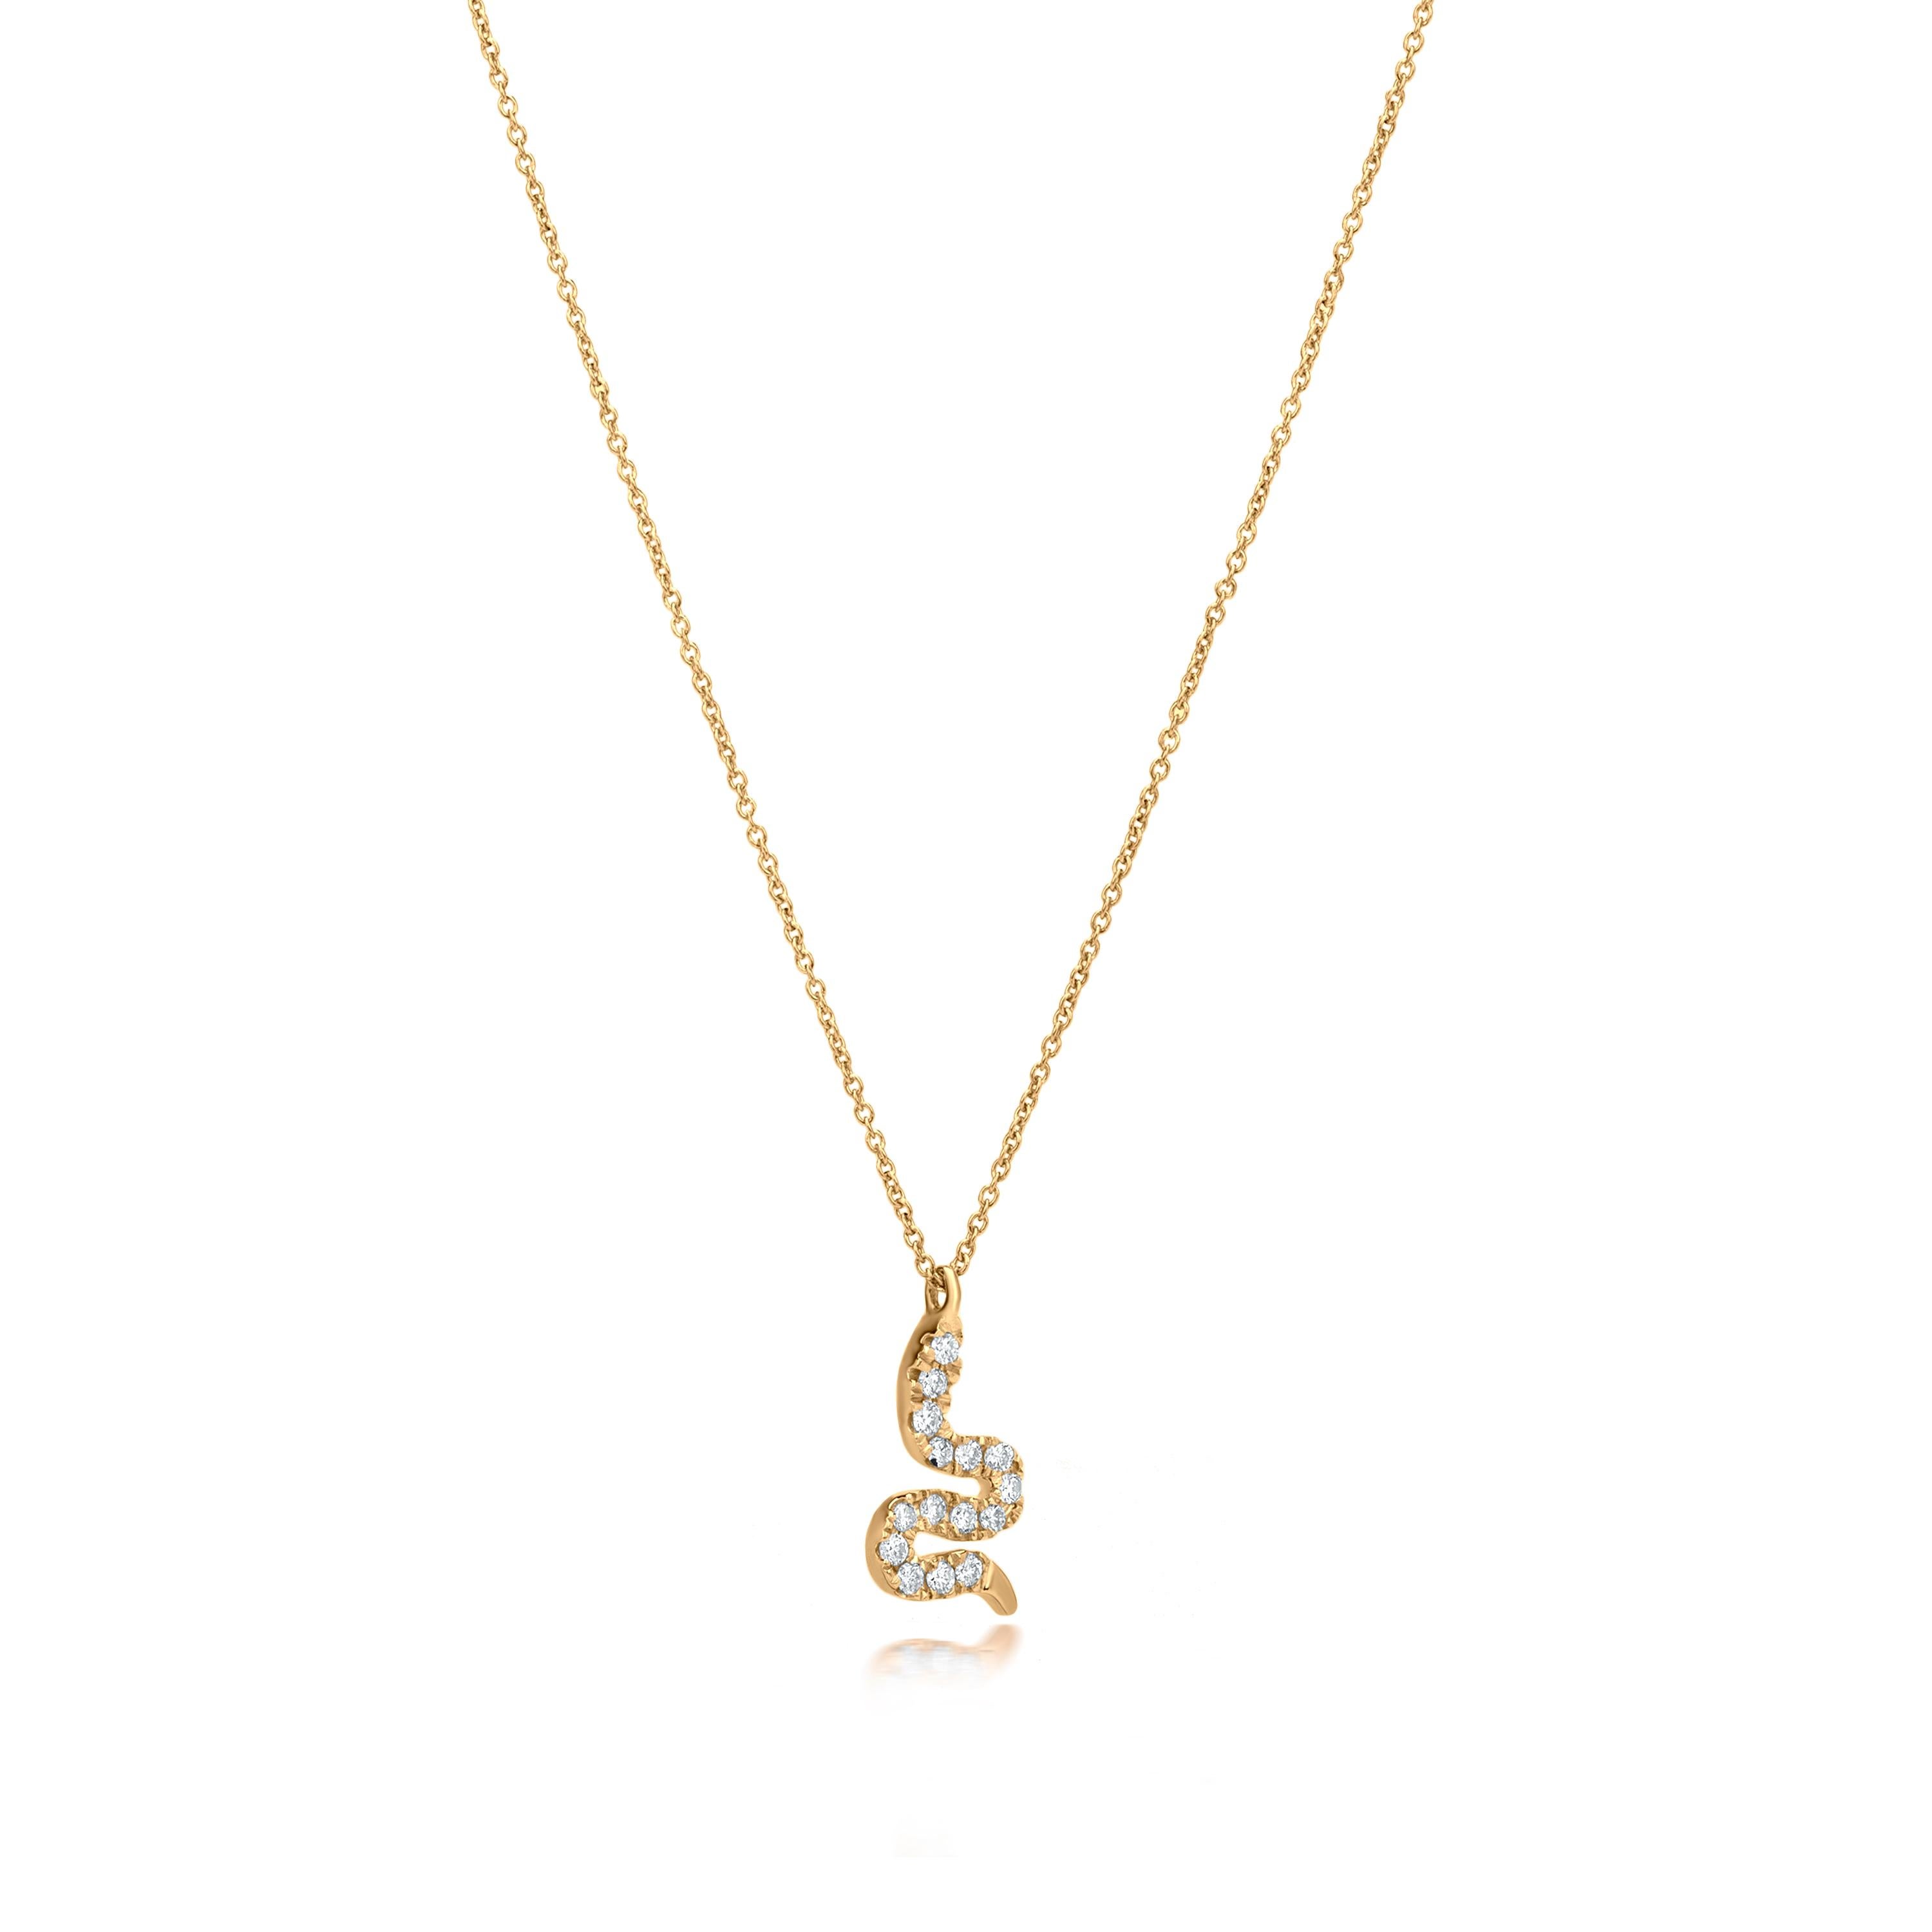 Round Cut Luxle Snake Diamond Pendant Necklace in 18k Yellow Gold